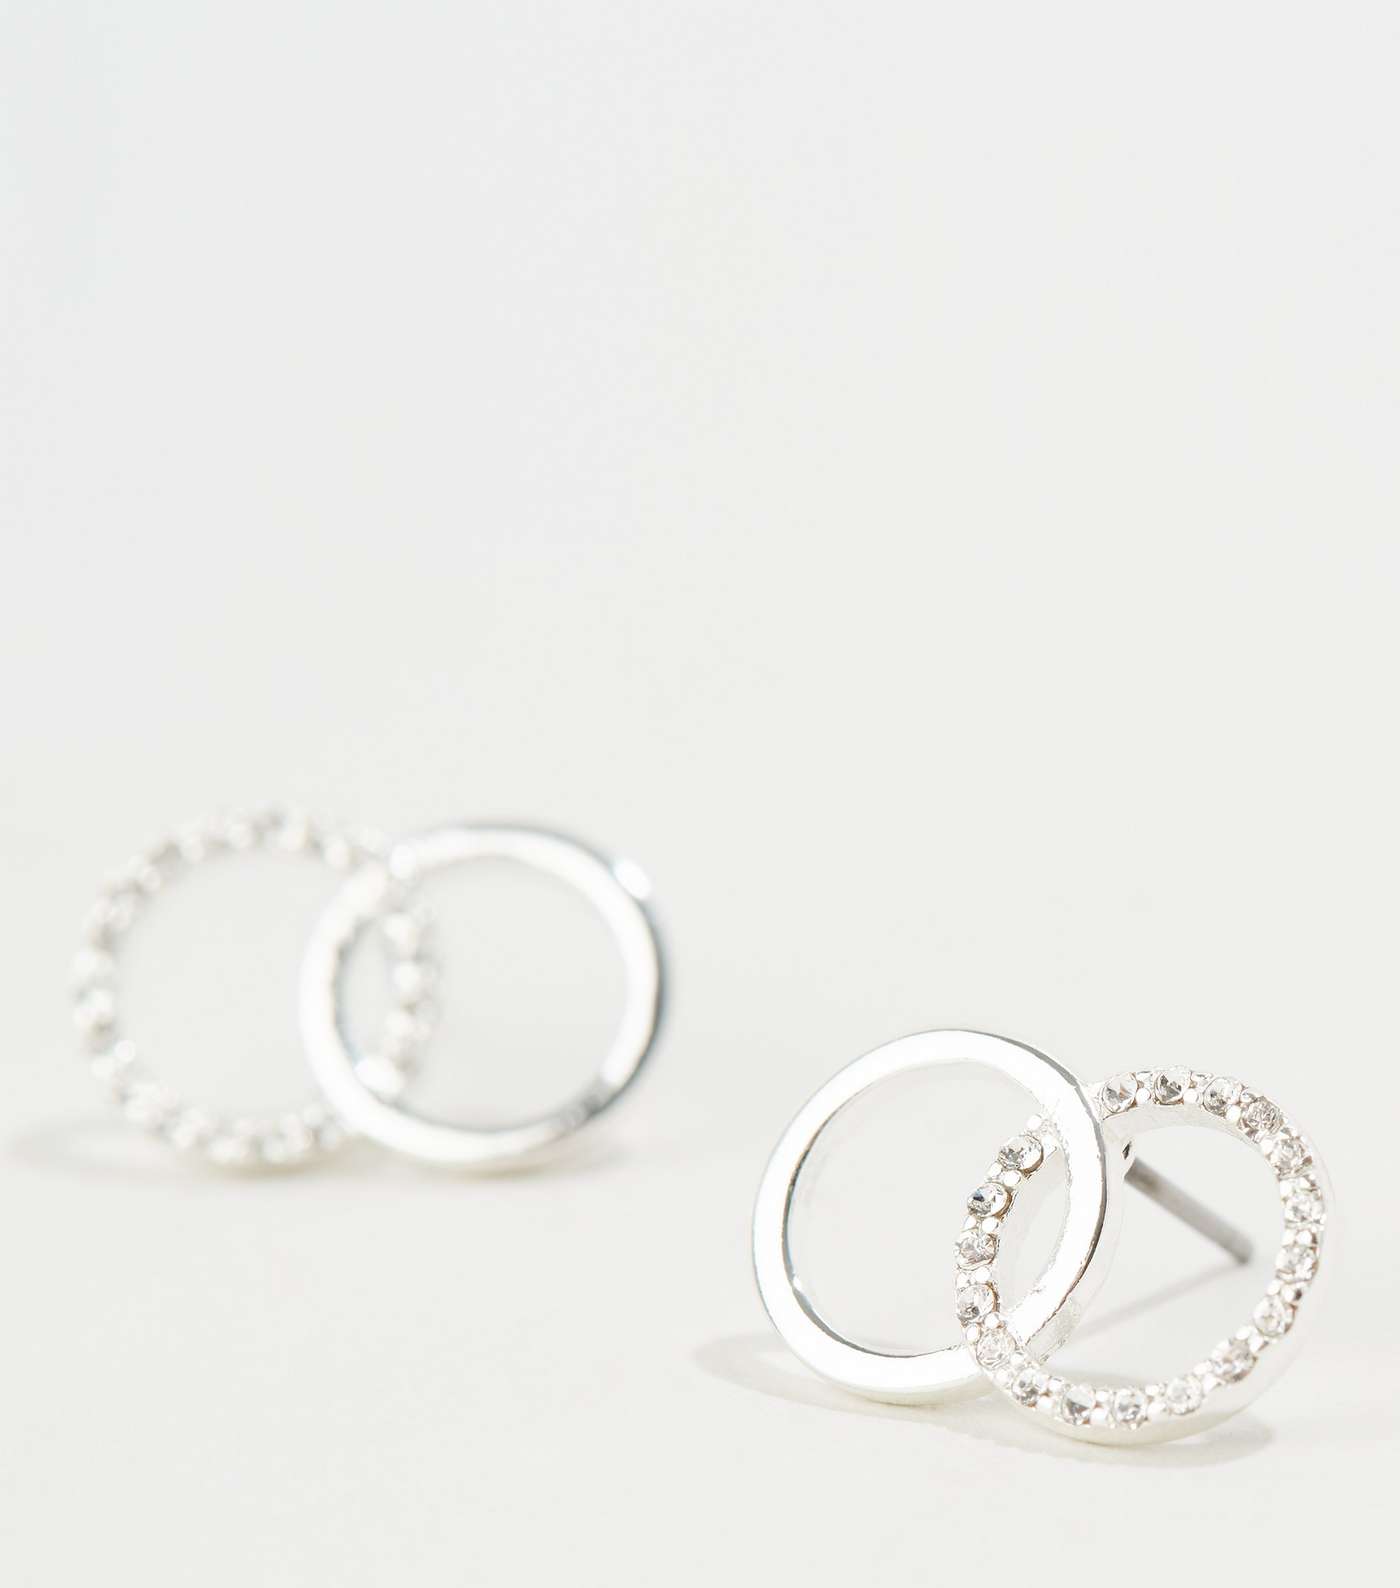 Silver Plated Circle Earrings with Crystals from Swarovski® Image 3